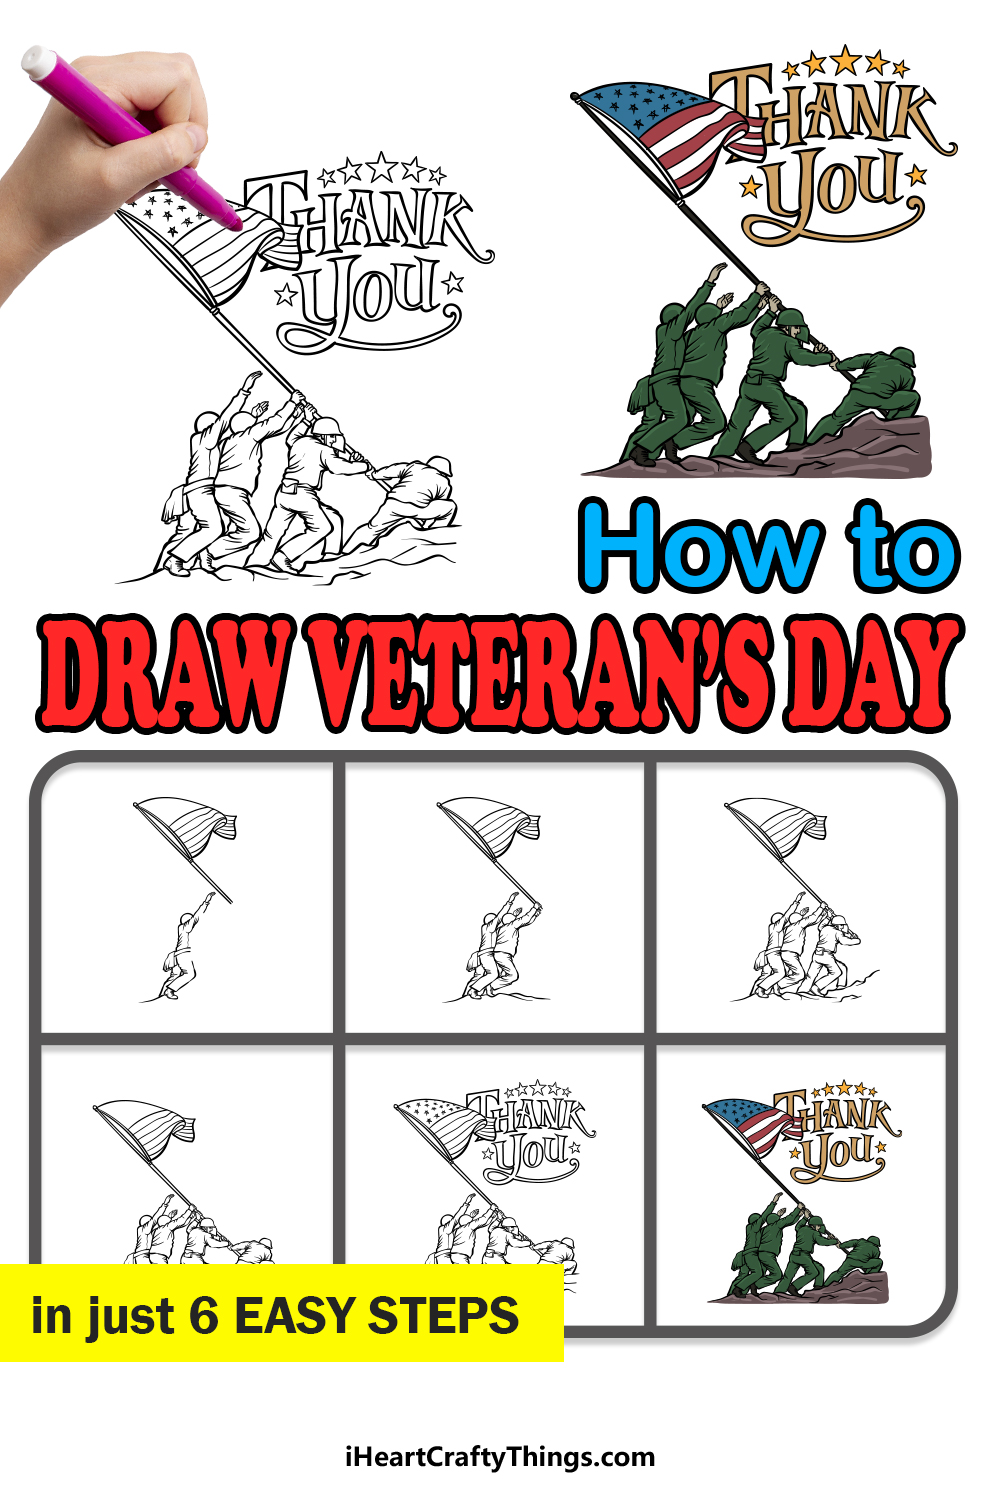 how to draw Veteran’s Day in 6 easy steps